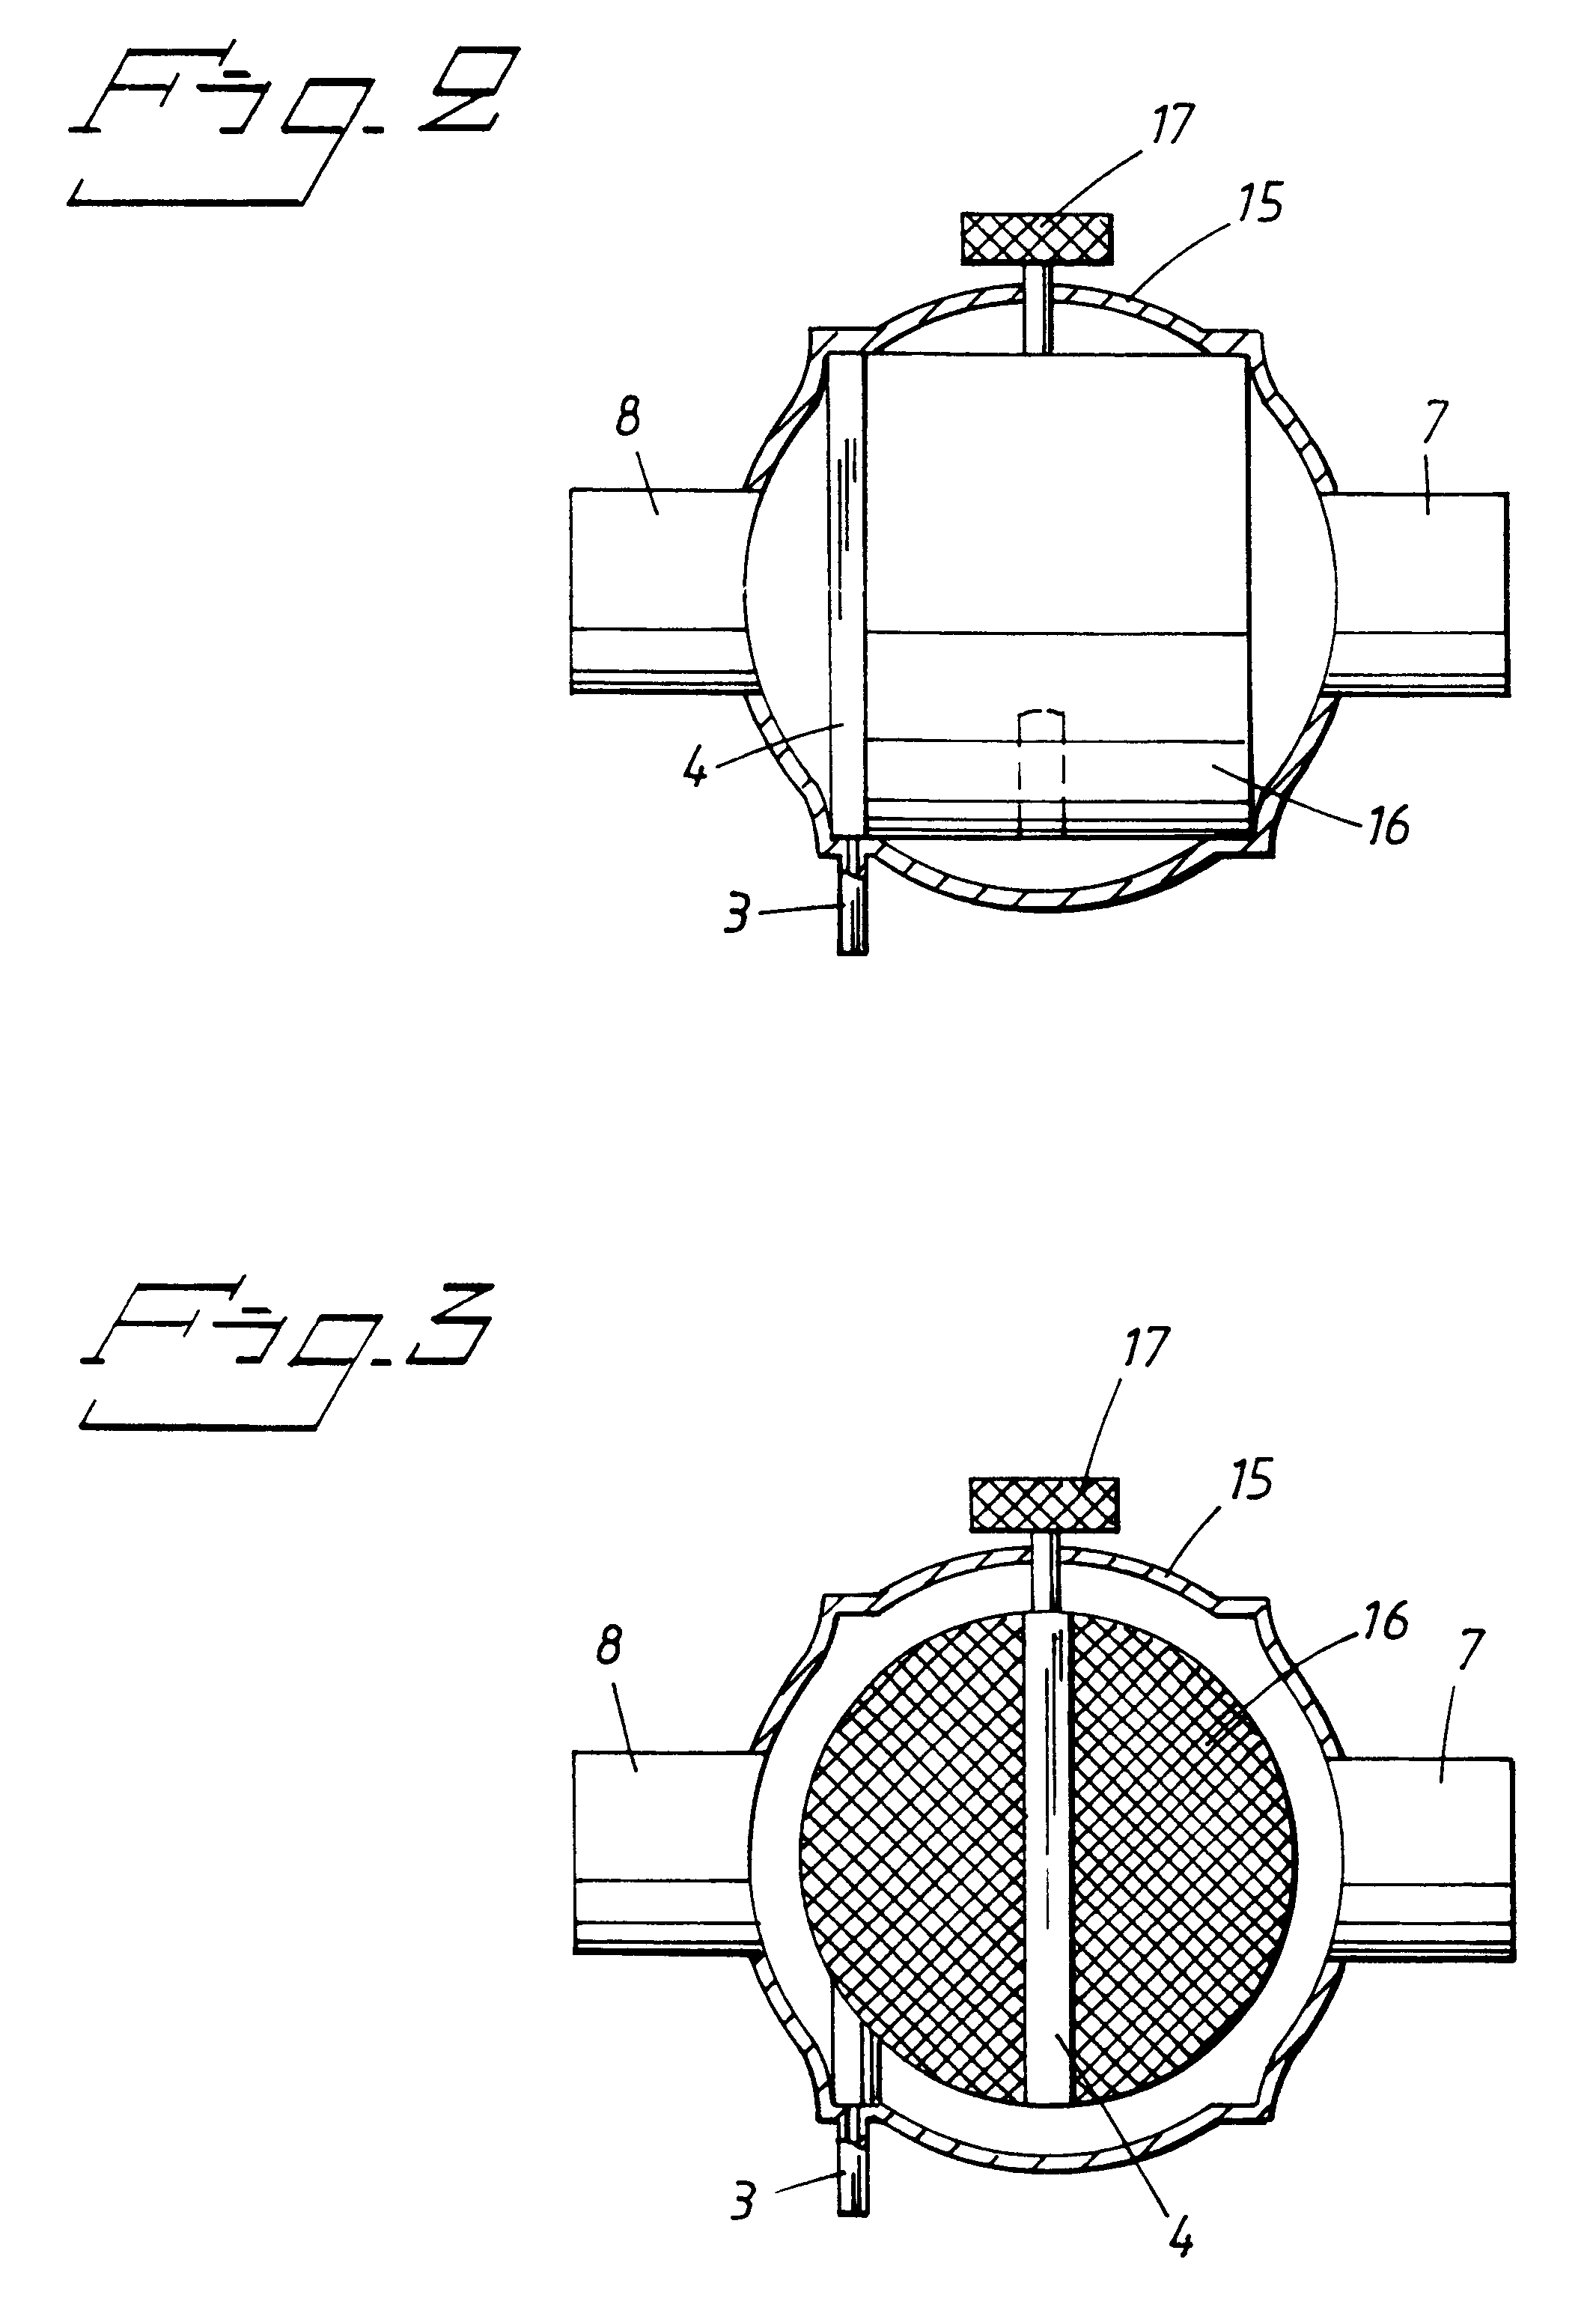 Device for recovering anaesthetic